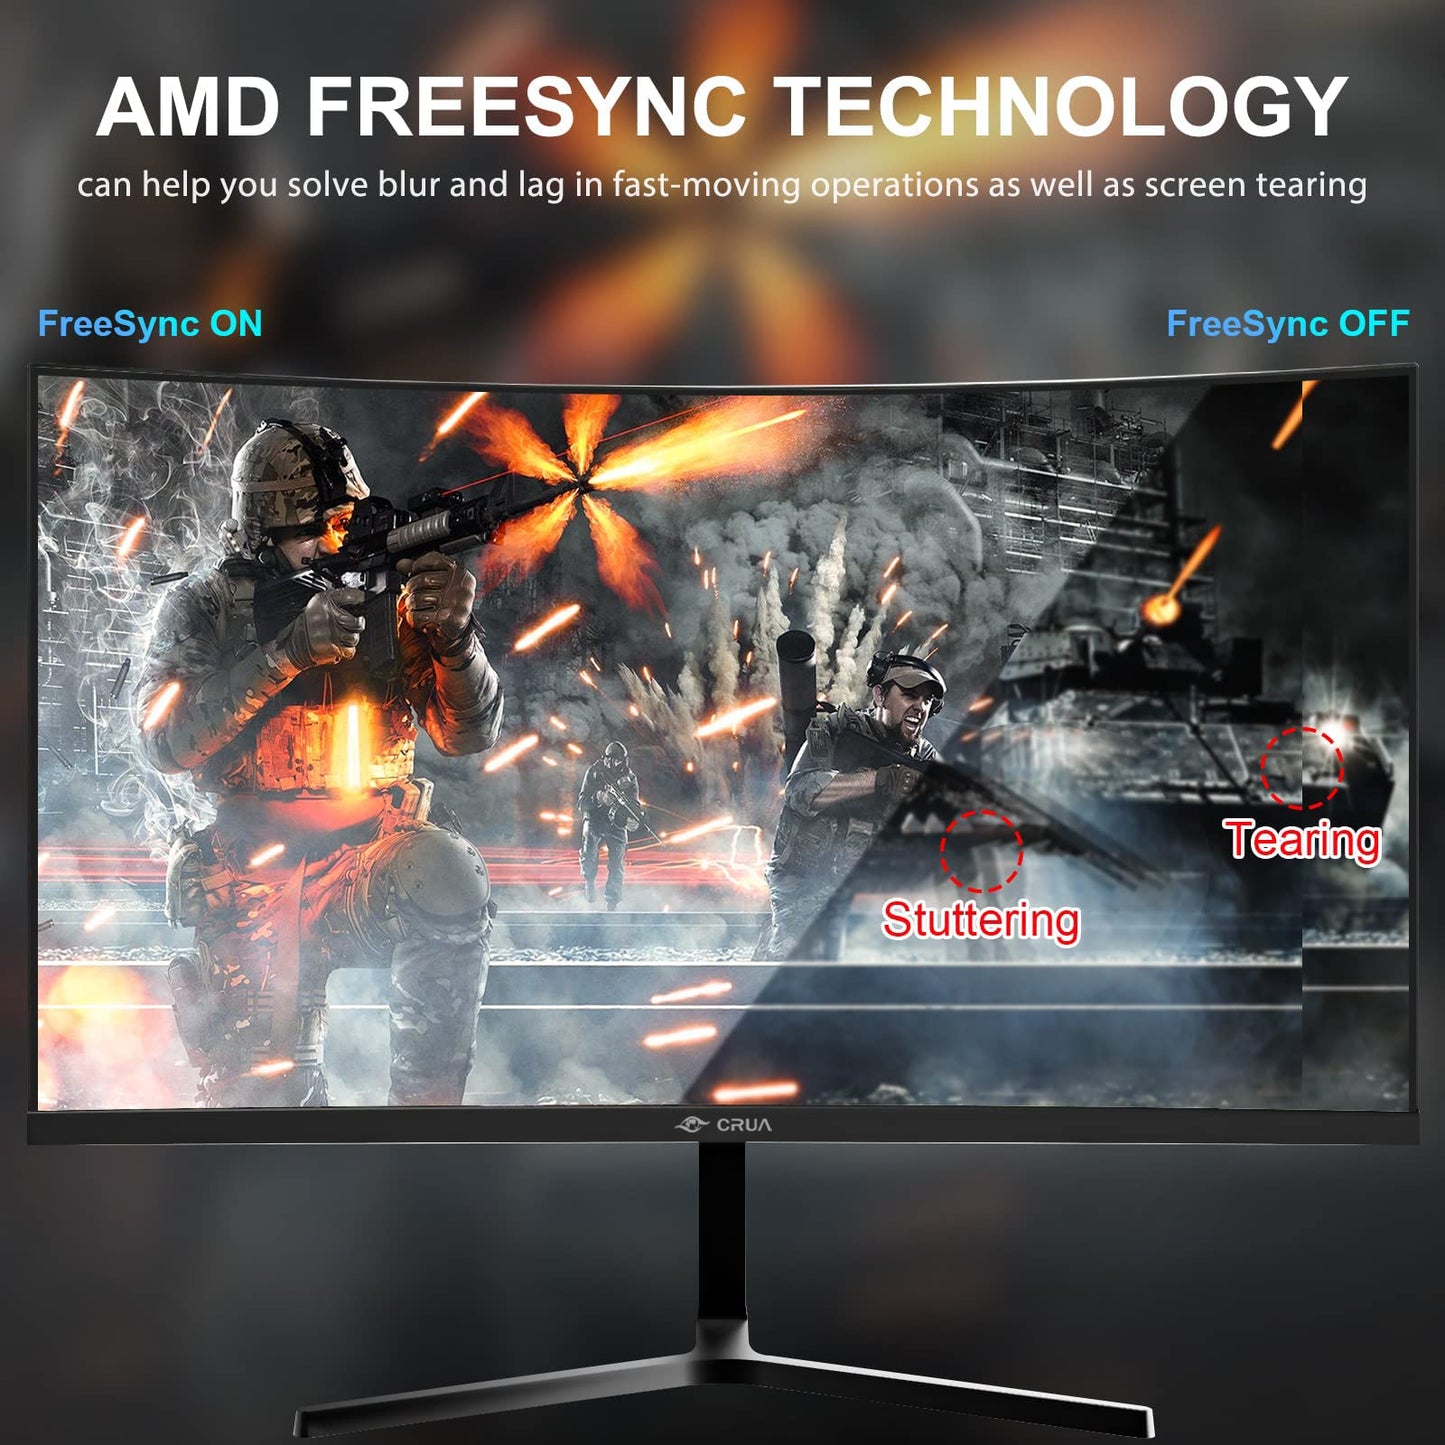 CRUA 24 Inch 144hz/180hz Curved Gaming Monitor, FHD 1080P Frameless Computer Monitors, Support AMD freesync Low Motion Blur, Eye Care, DisplayPort, HDMI, Compatible Wall Mountable Installs-Black